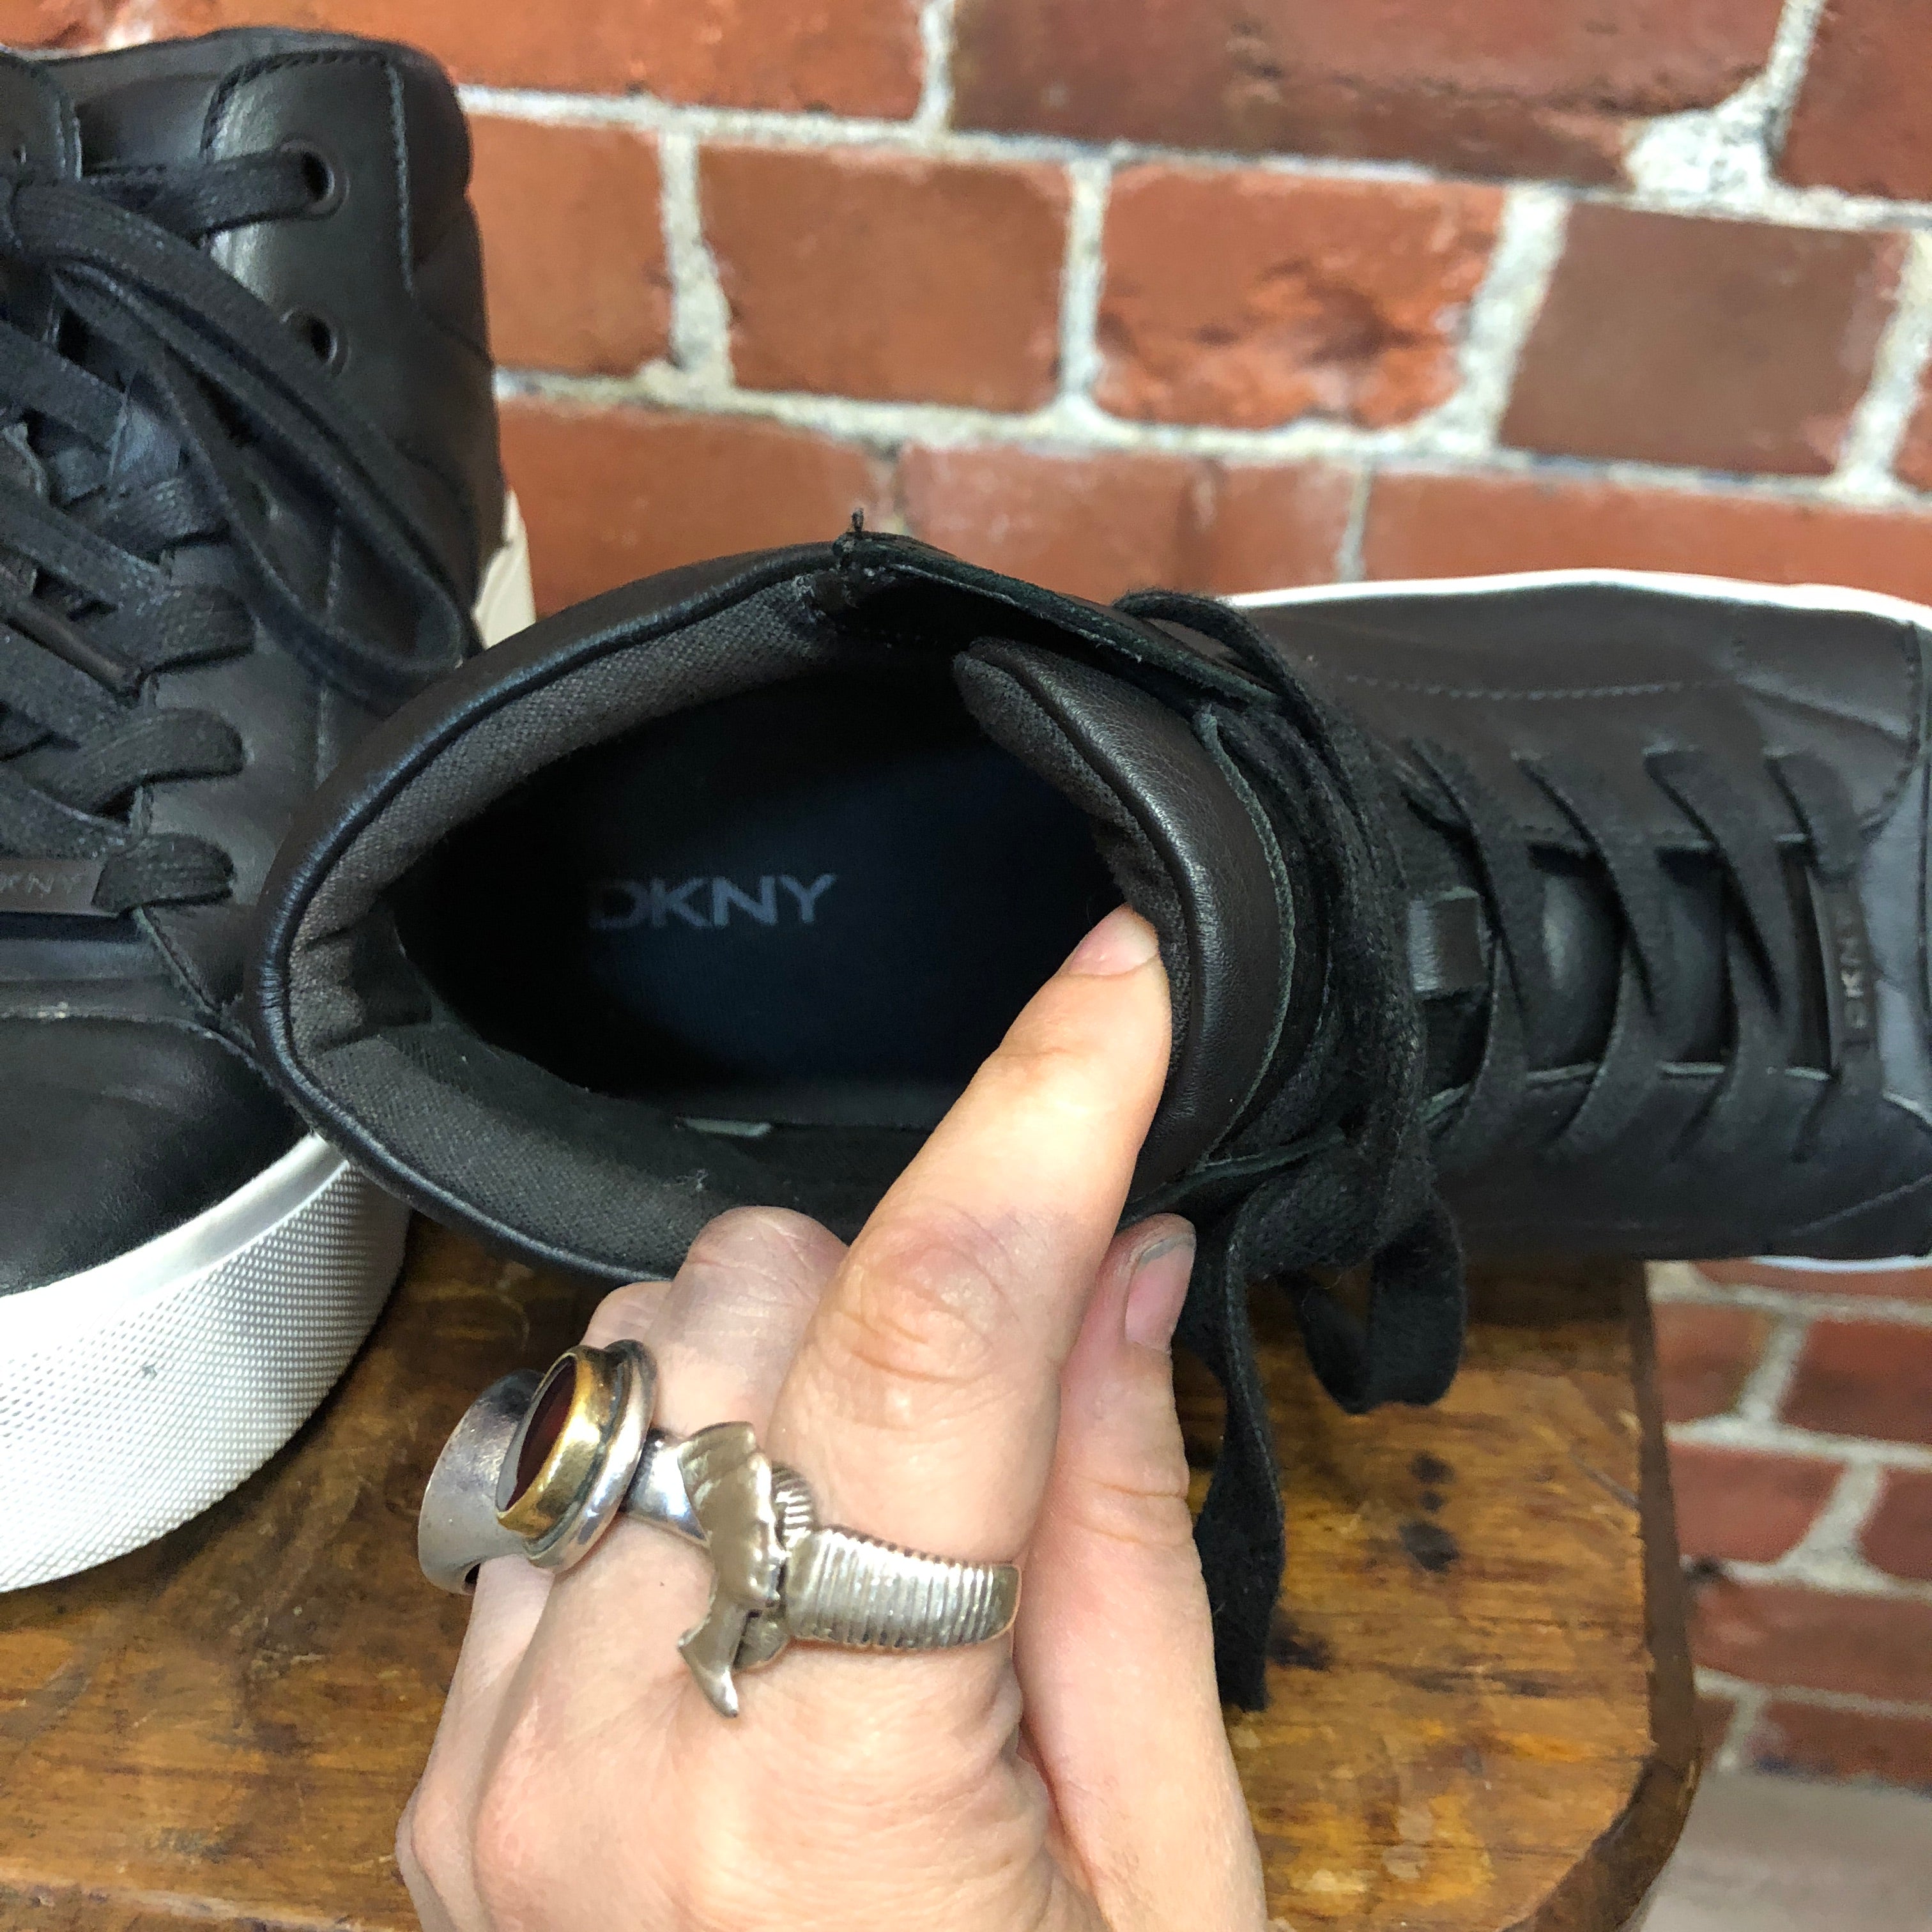 DKNY leather platform sneakers 37